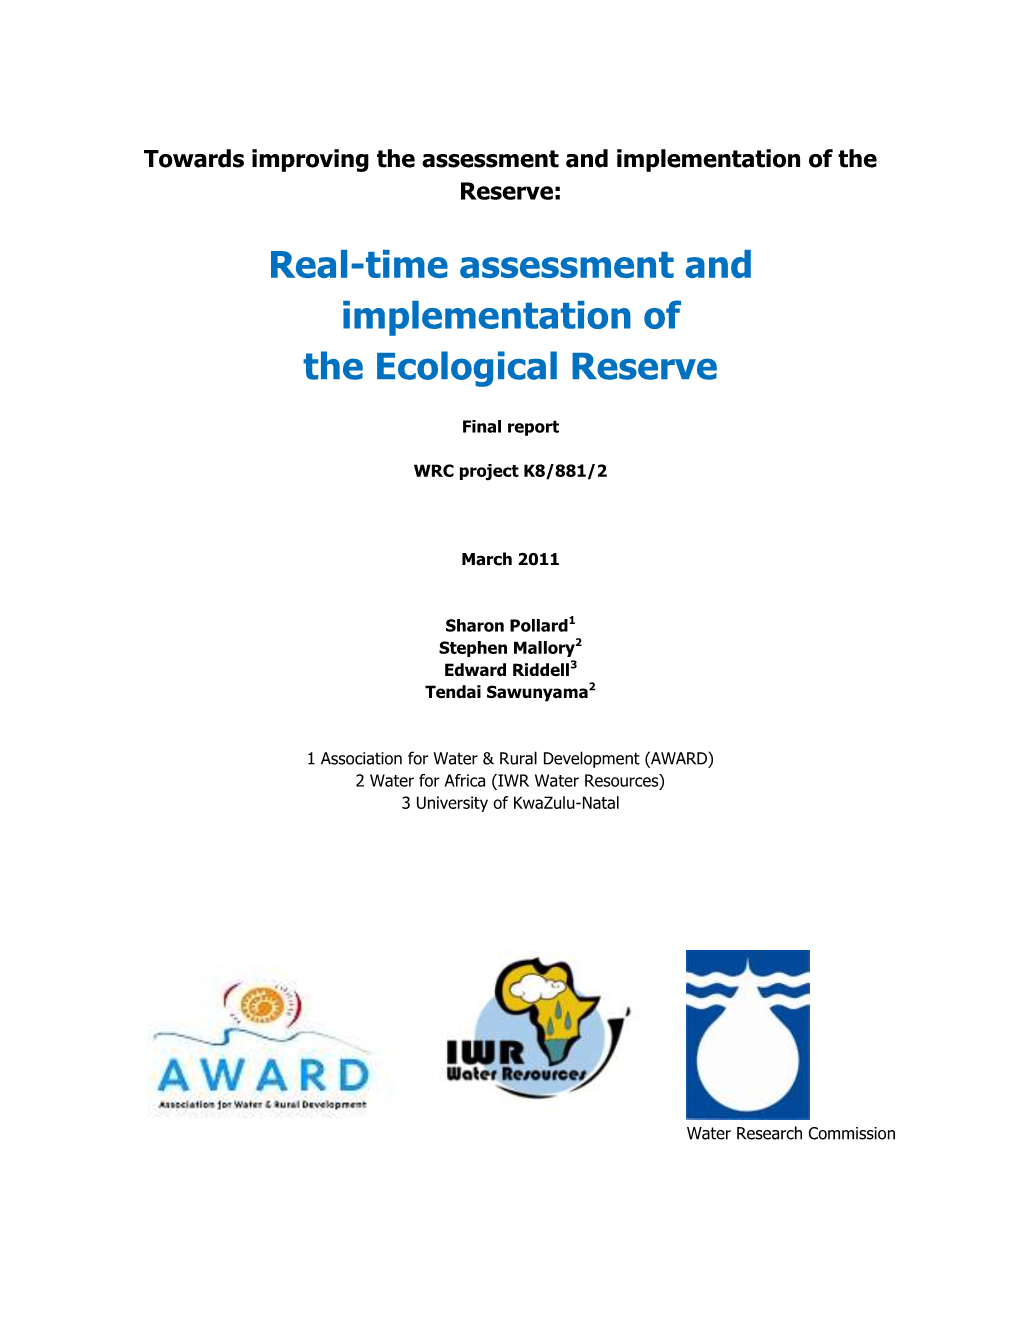 Towards Improving the Assessment and Implementation of the Reserve